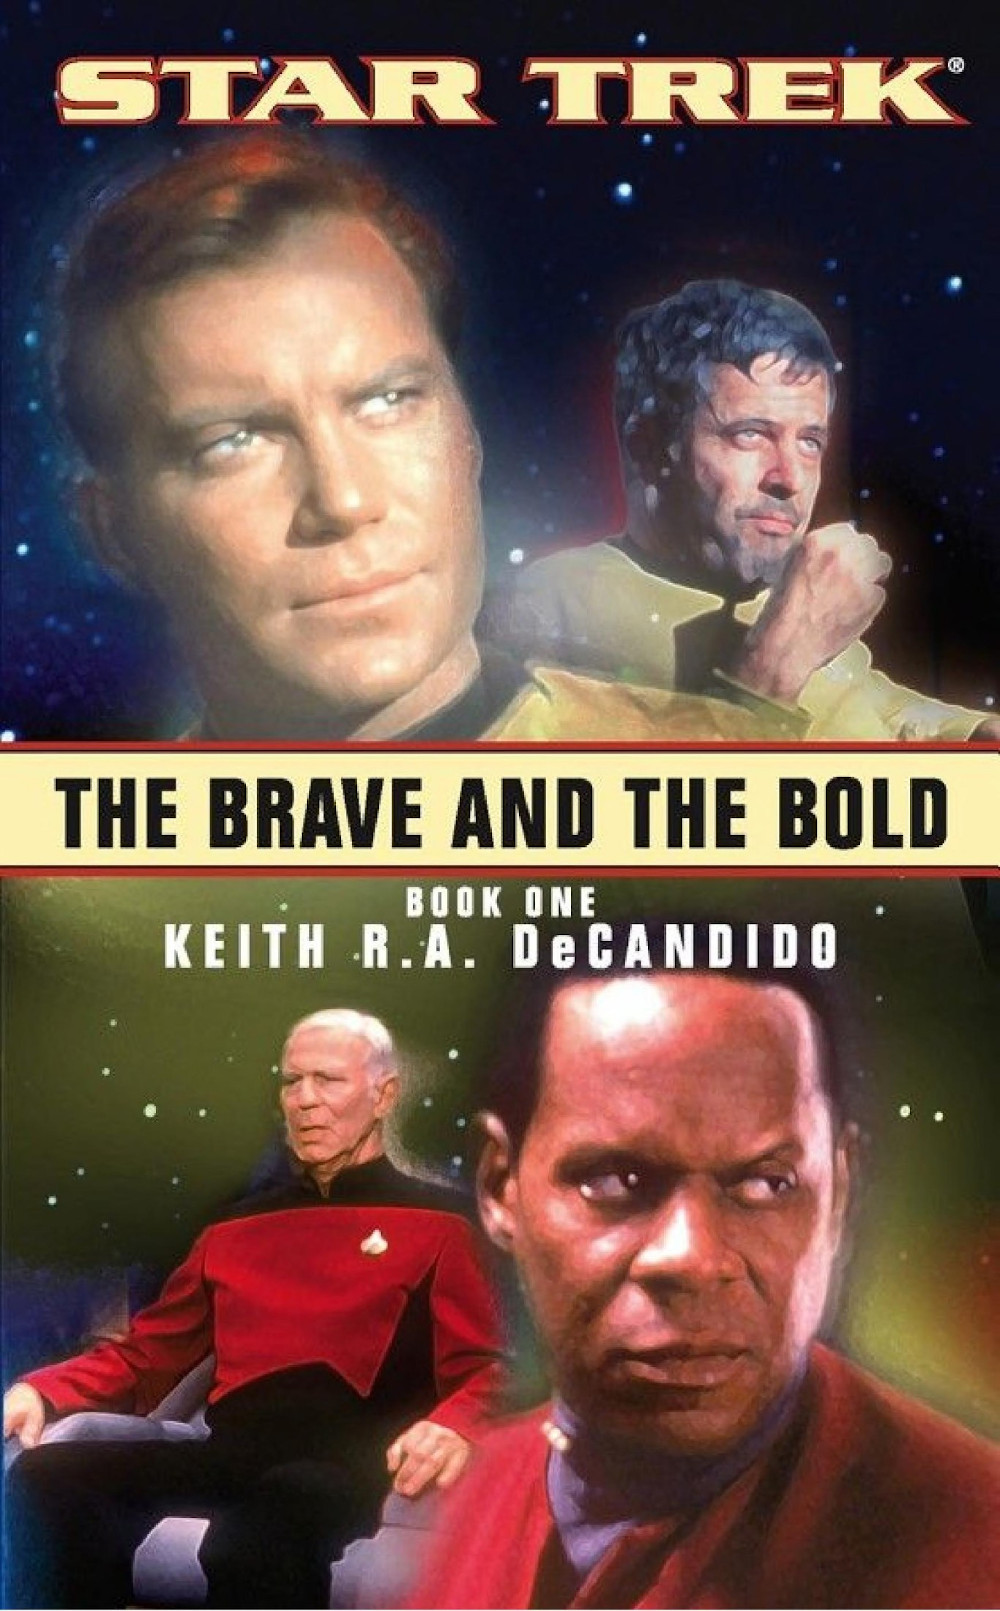 The Brave and the Bold, Book One